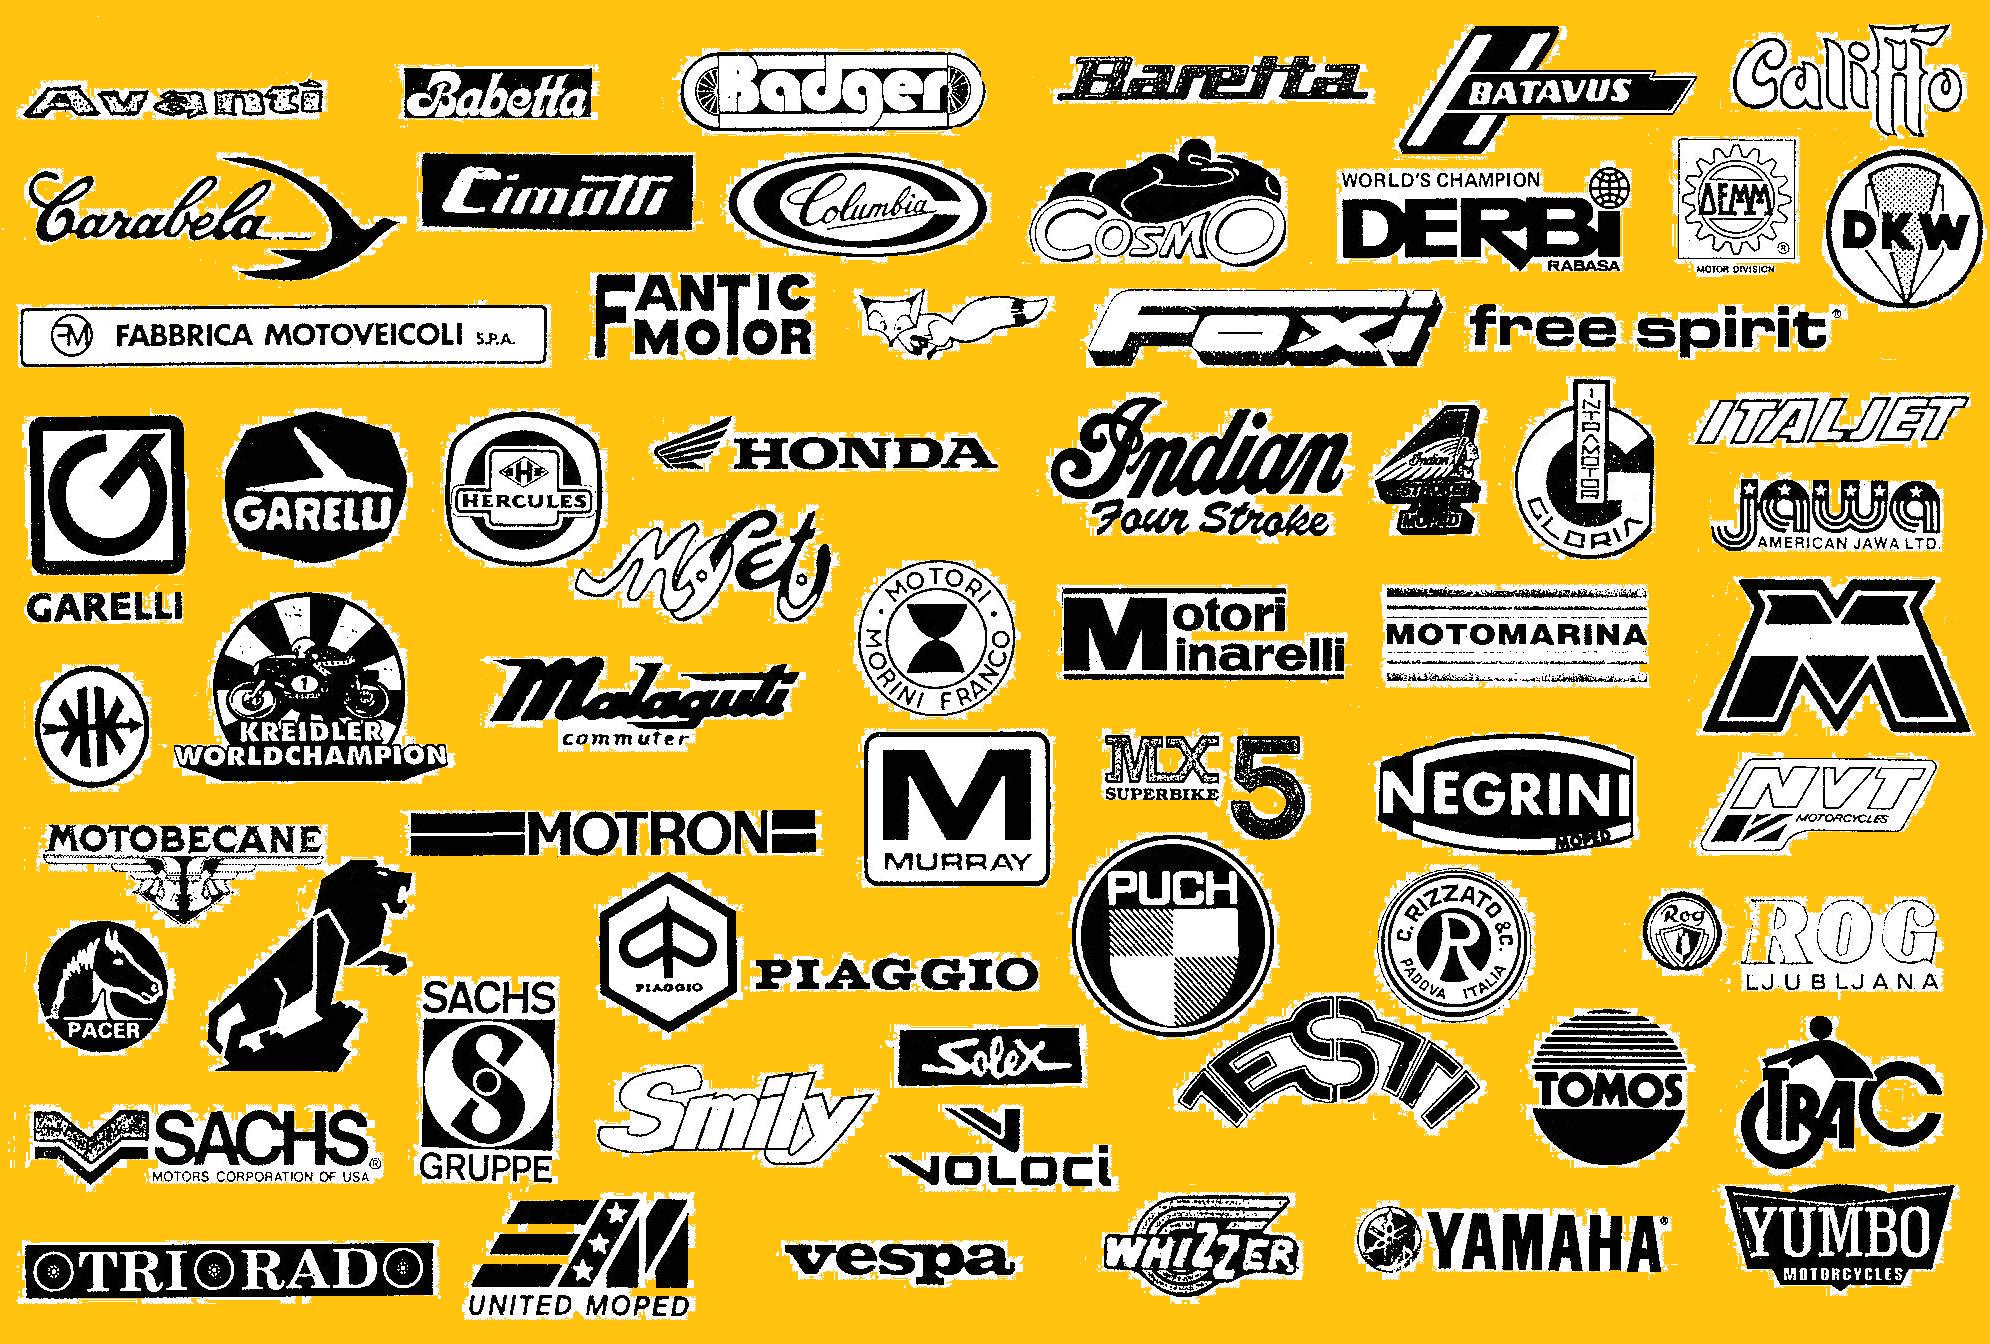 Black and Yellow Company Logo - Does Anyone Know What Moped or Motorcycle This Is?